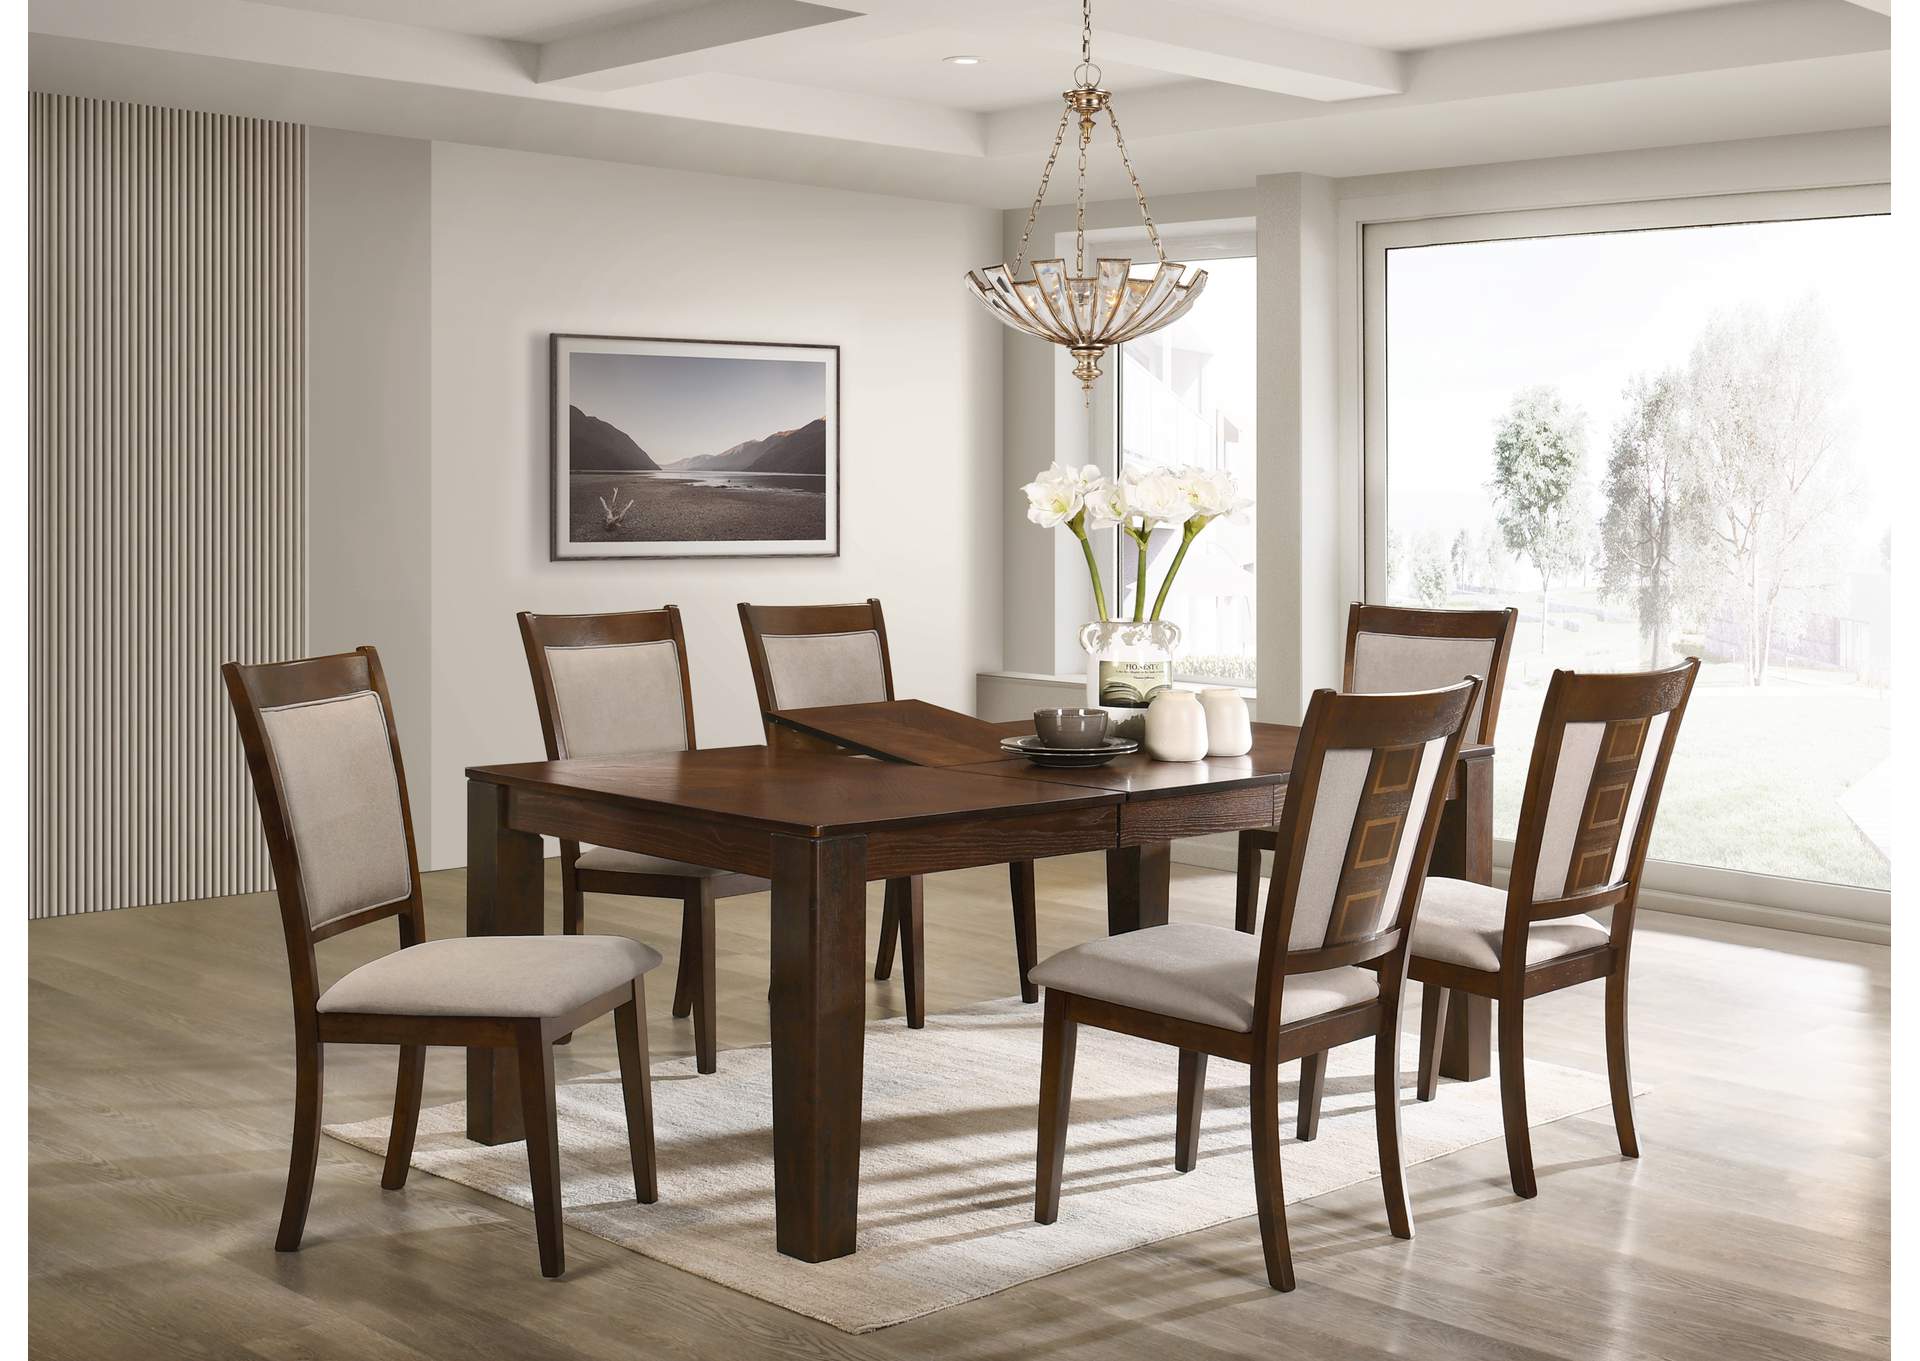 Milton Espresso & Beige 7 Piece Dining Set -Table W/ 6 Side Chairs,Cosmos Furniture